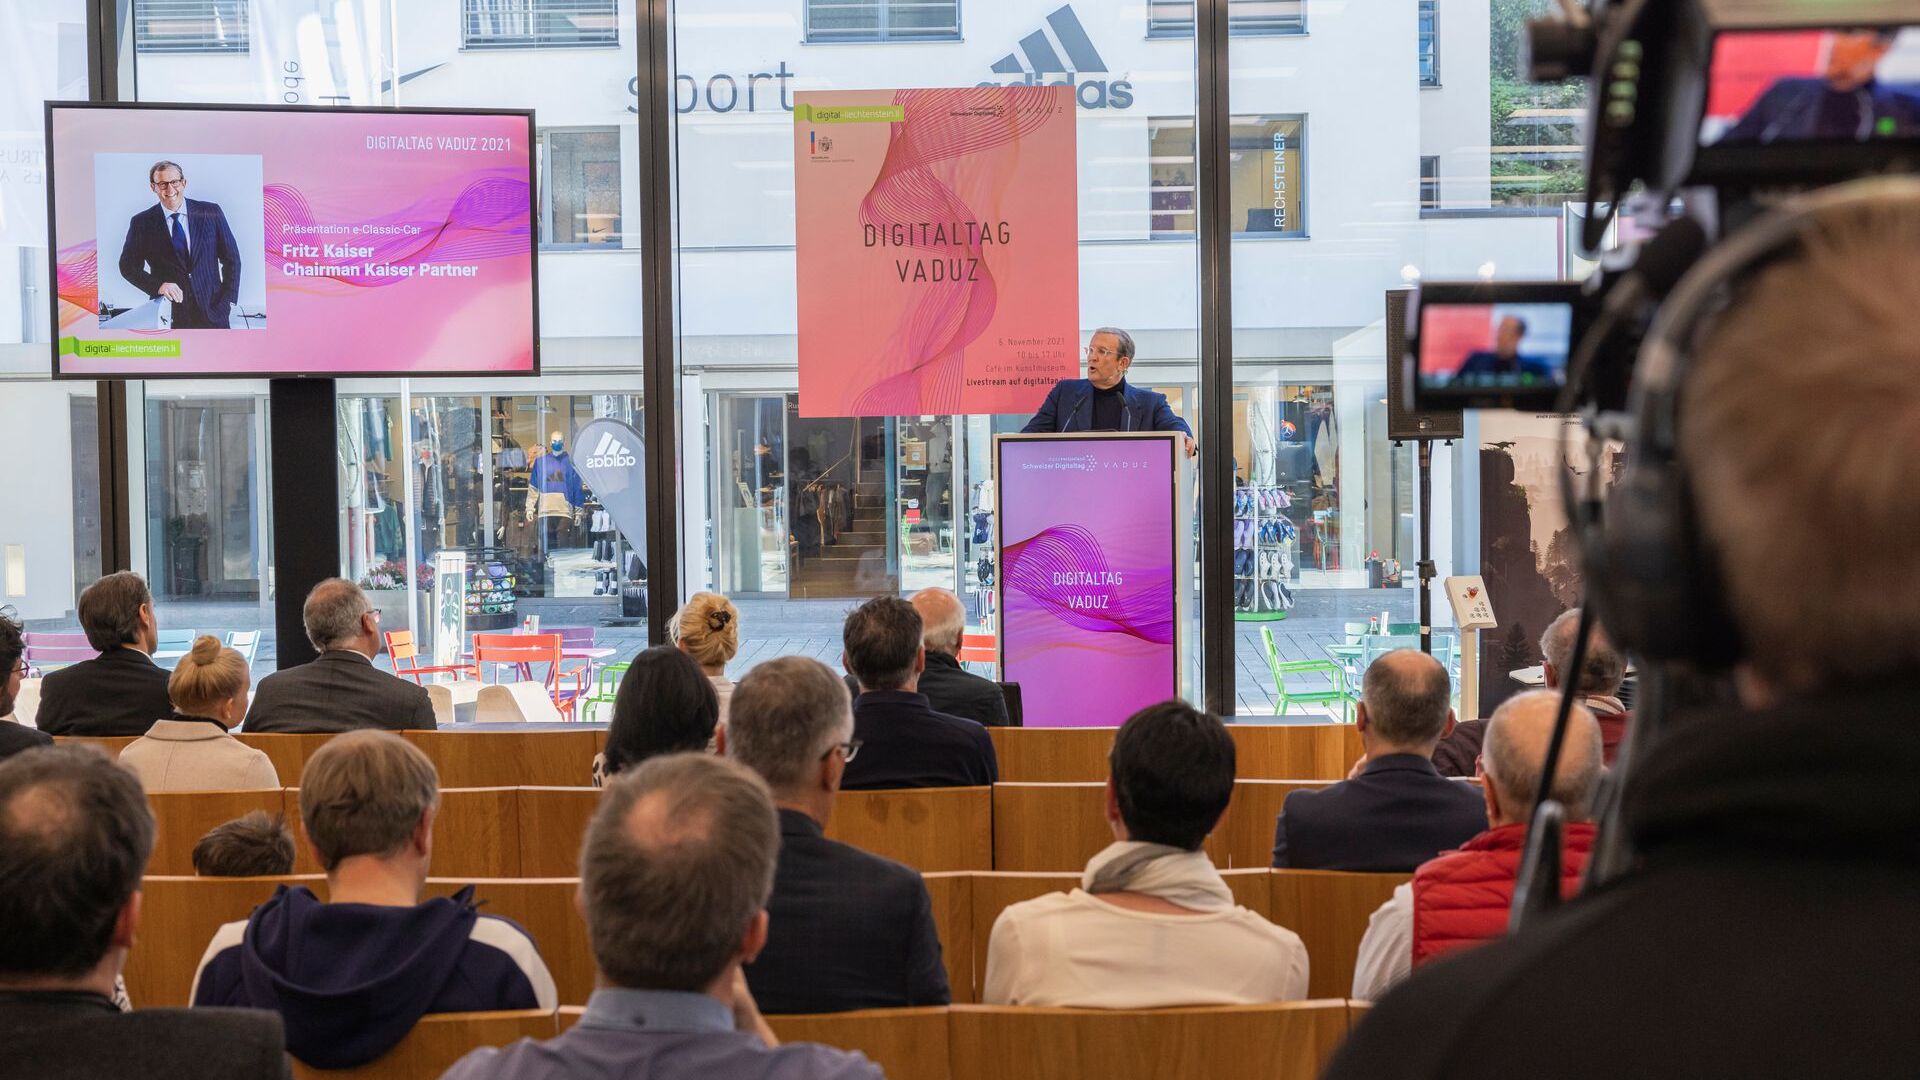 The "Digitaltag Vaduz" was welcomed by the Kunstmuseum of the capital of the Principality of Liechtenstein on Saturday 6 November 2021: the speech by Fritz Kaiser, Chairman and owner of Kaiser Partner